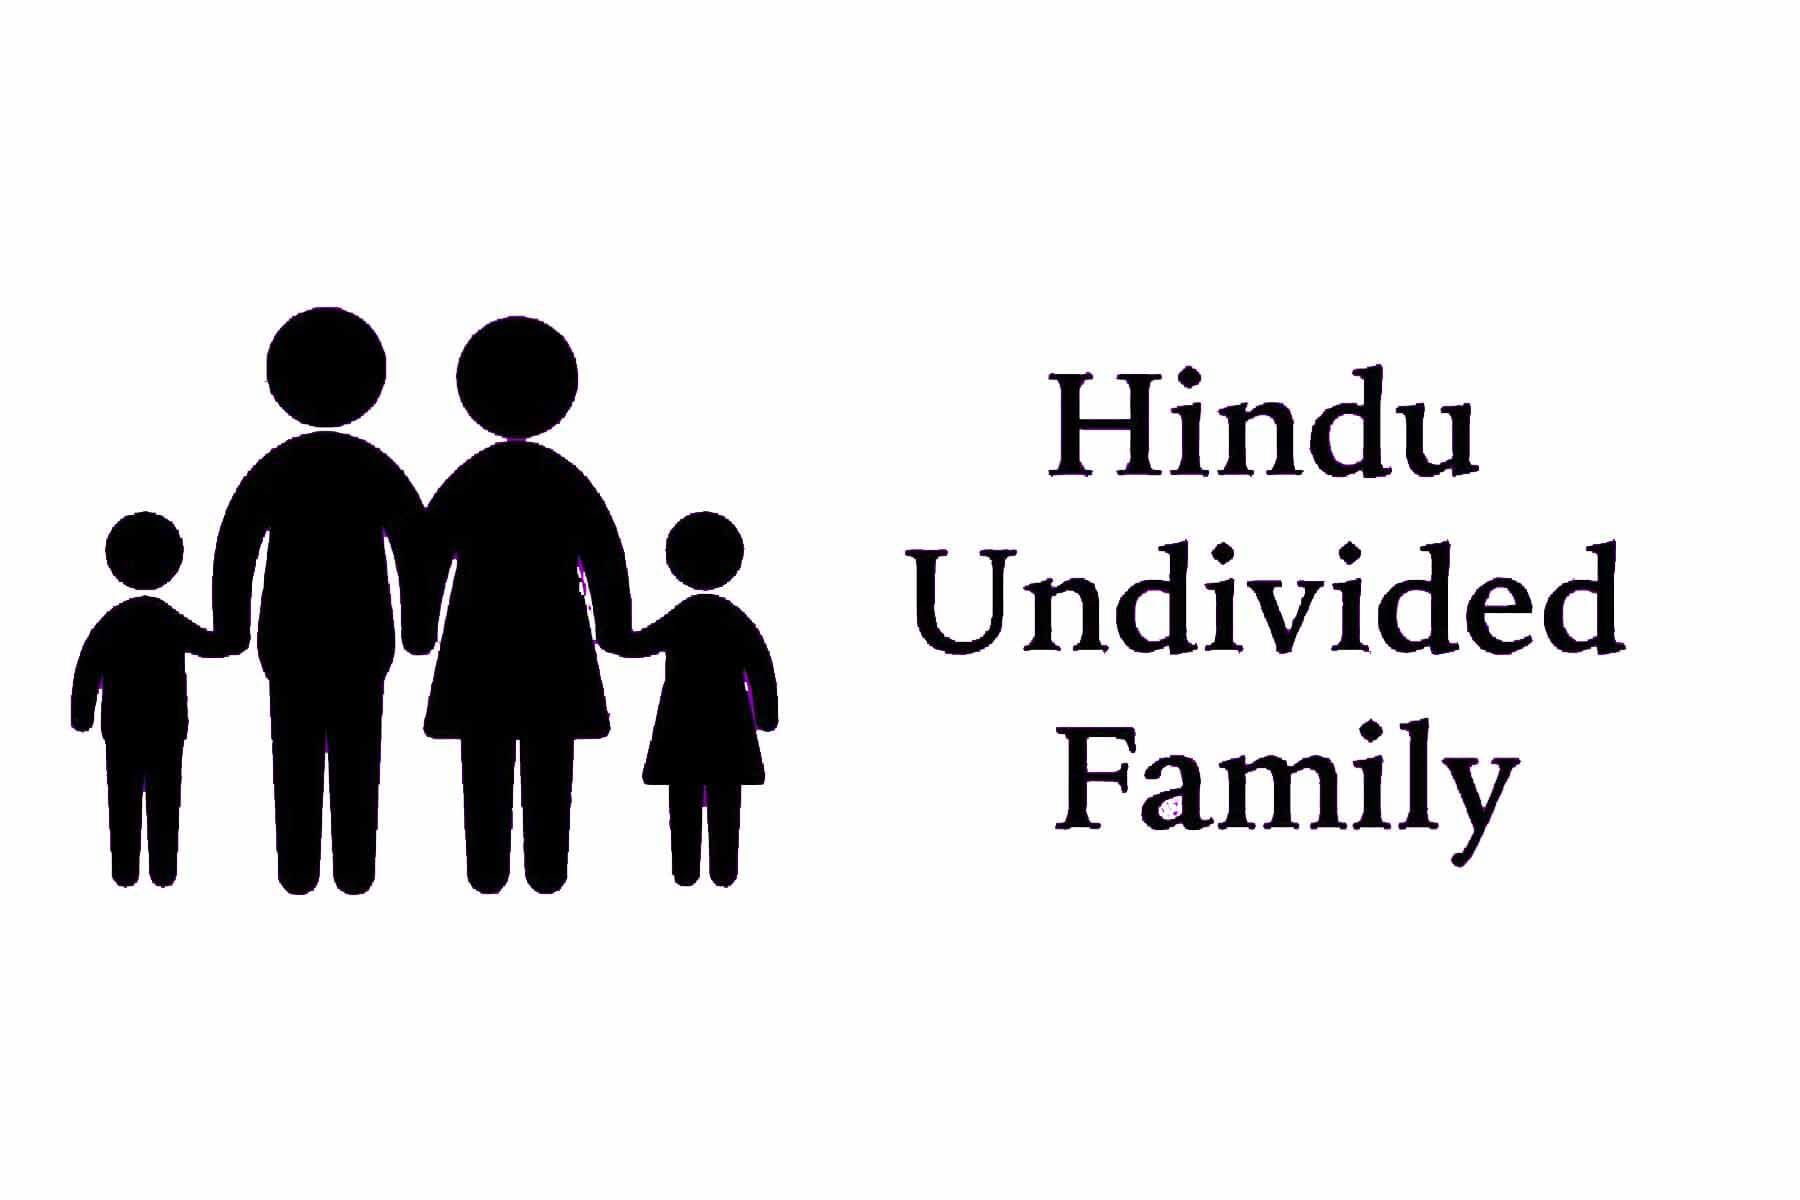 partition of a Hindu Undivided Family